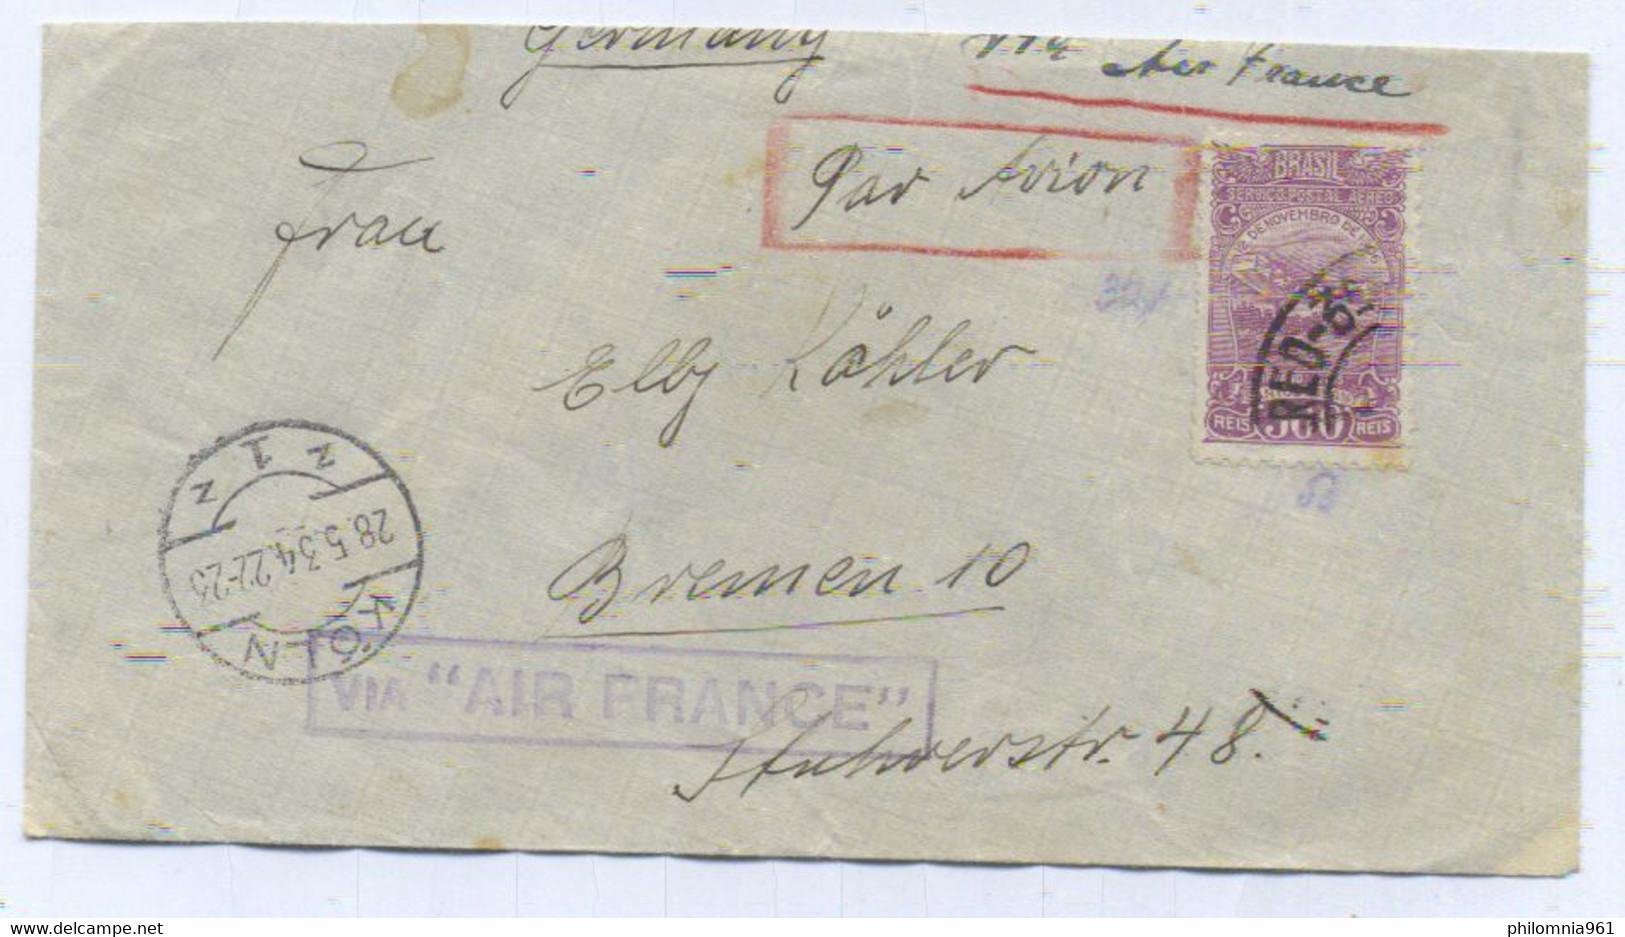 Brazil AIR FRANCE RIO RED PMK AIRMAIL COVER TO Koln Germany 1934 - Airmail (Private Companies)